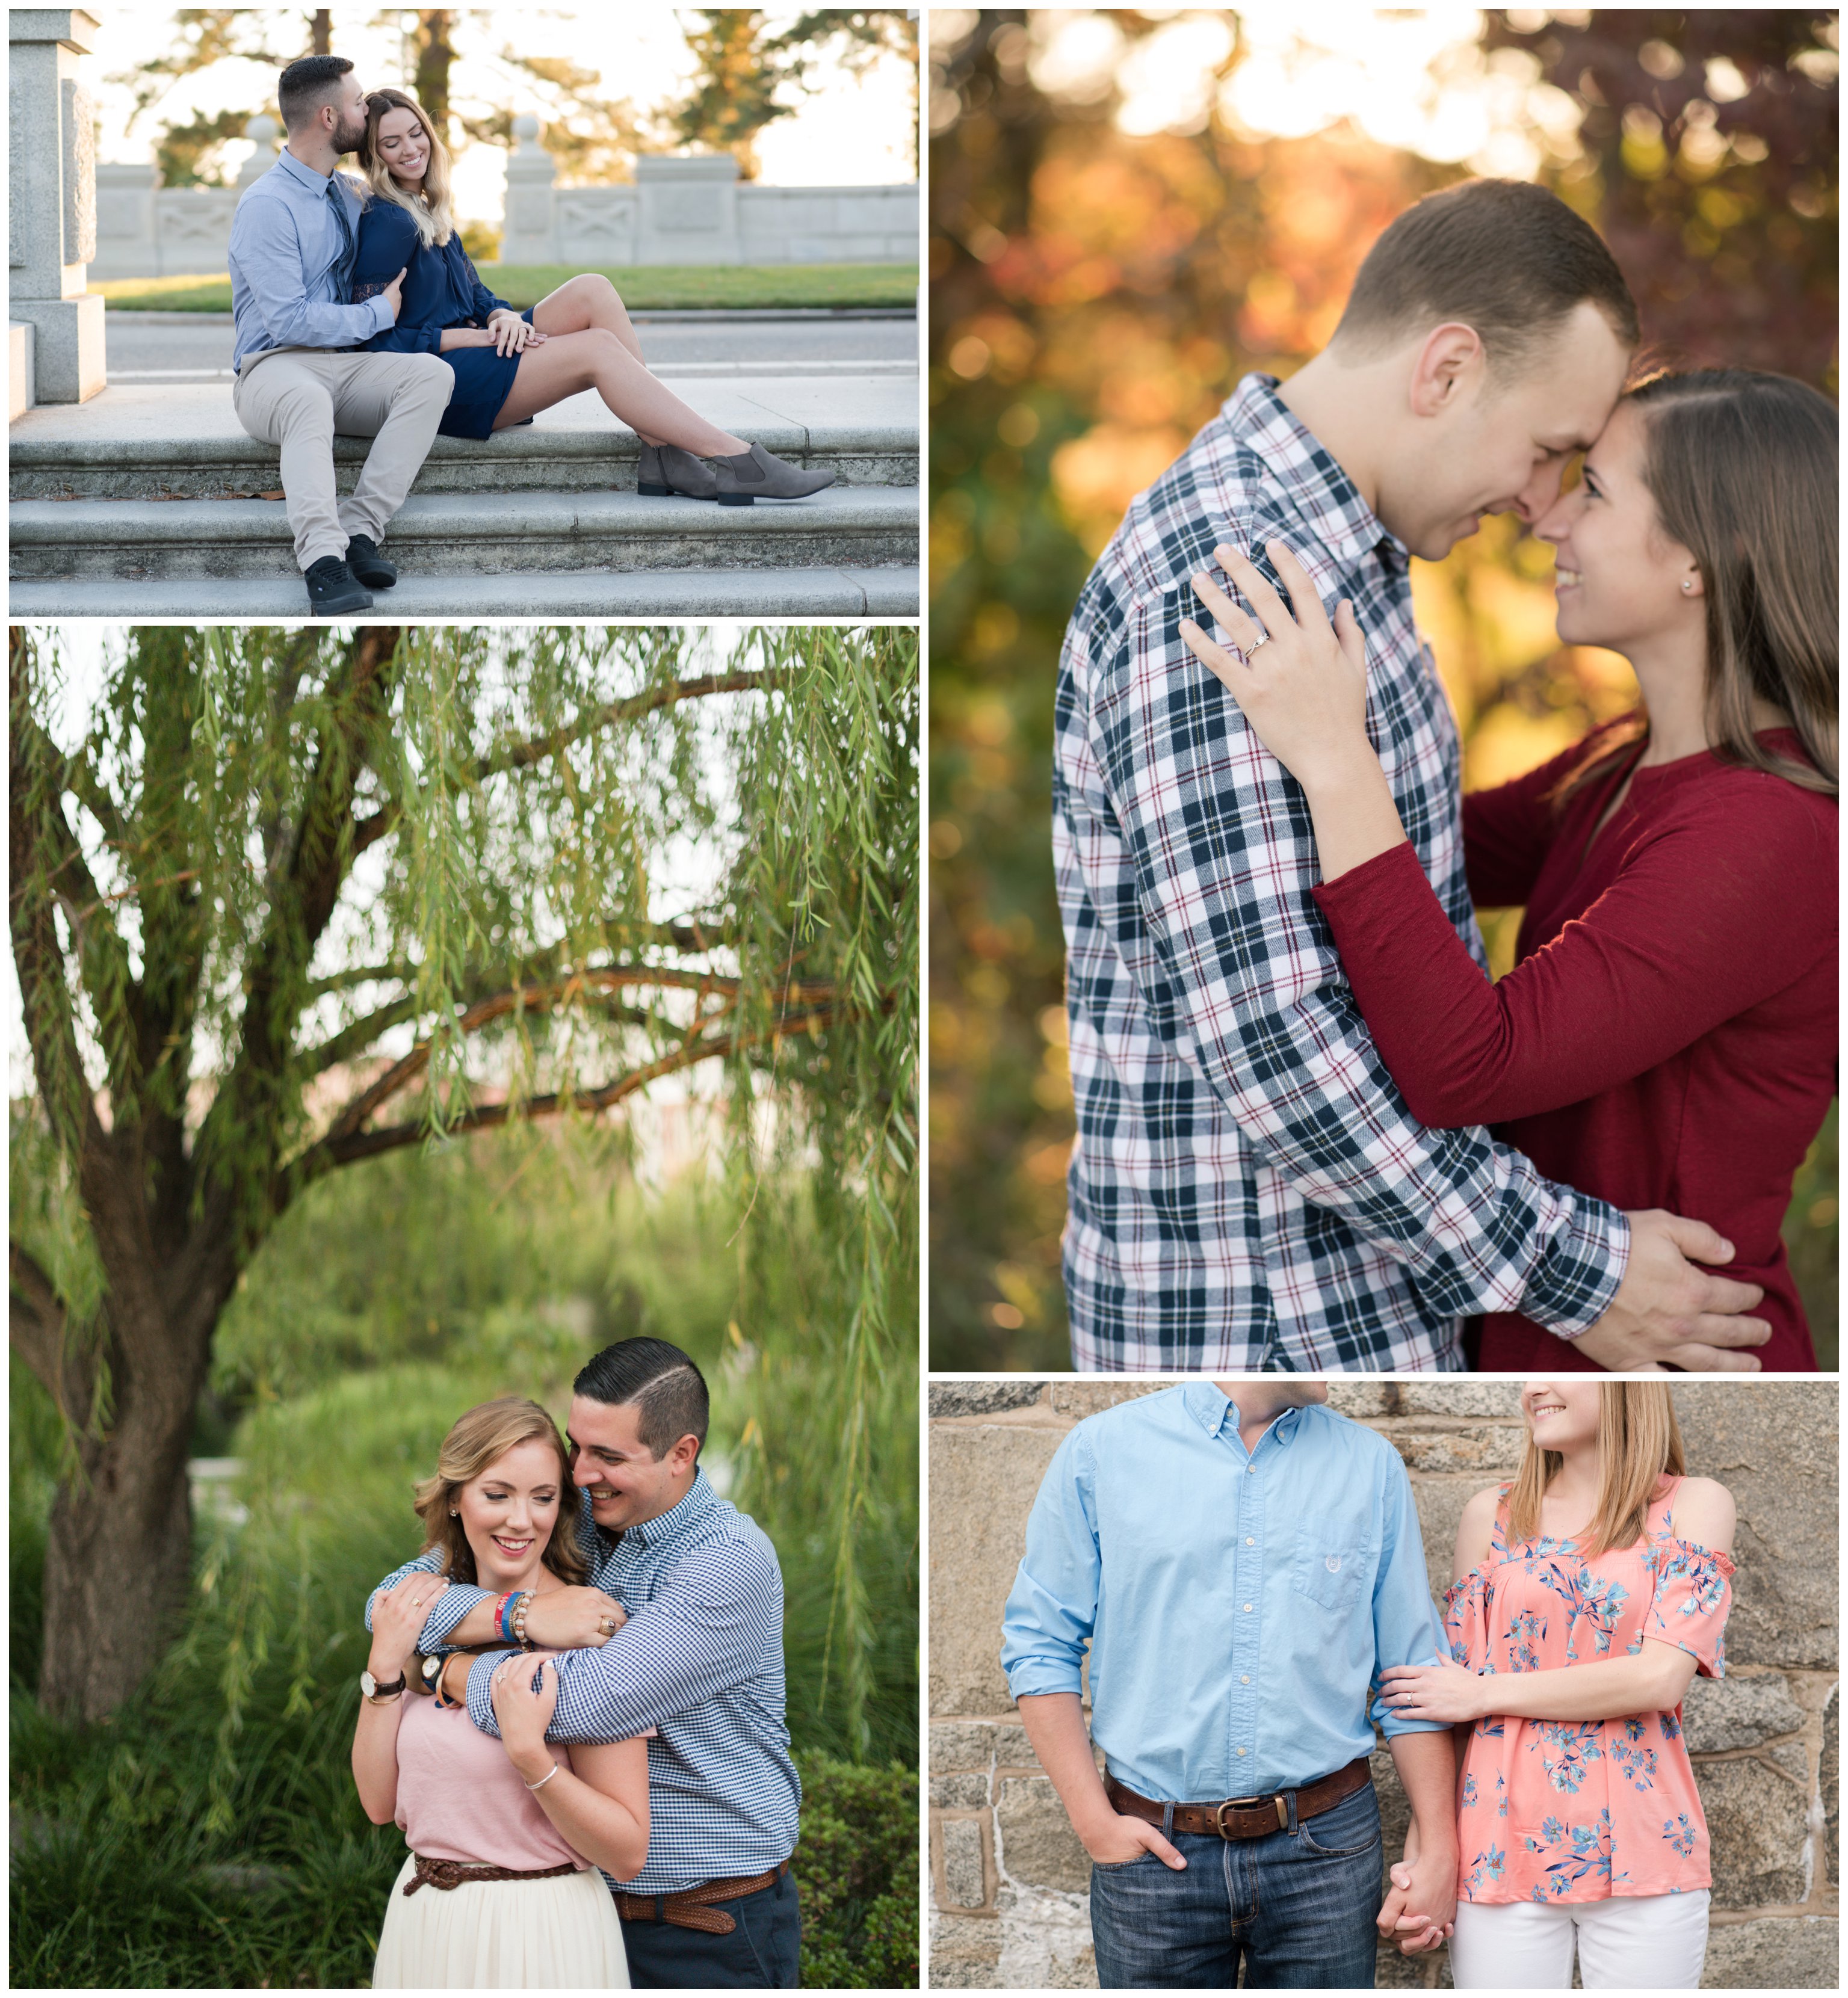 complimenting outfit inspiration for engagement session by virginia wedding photographer